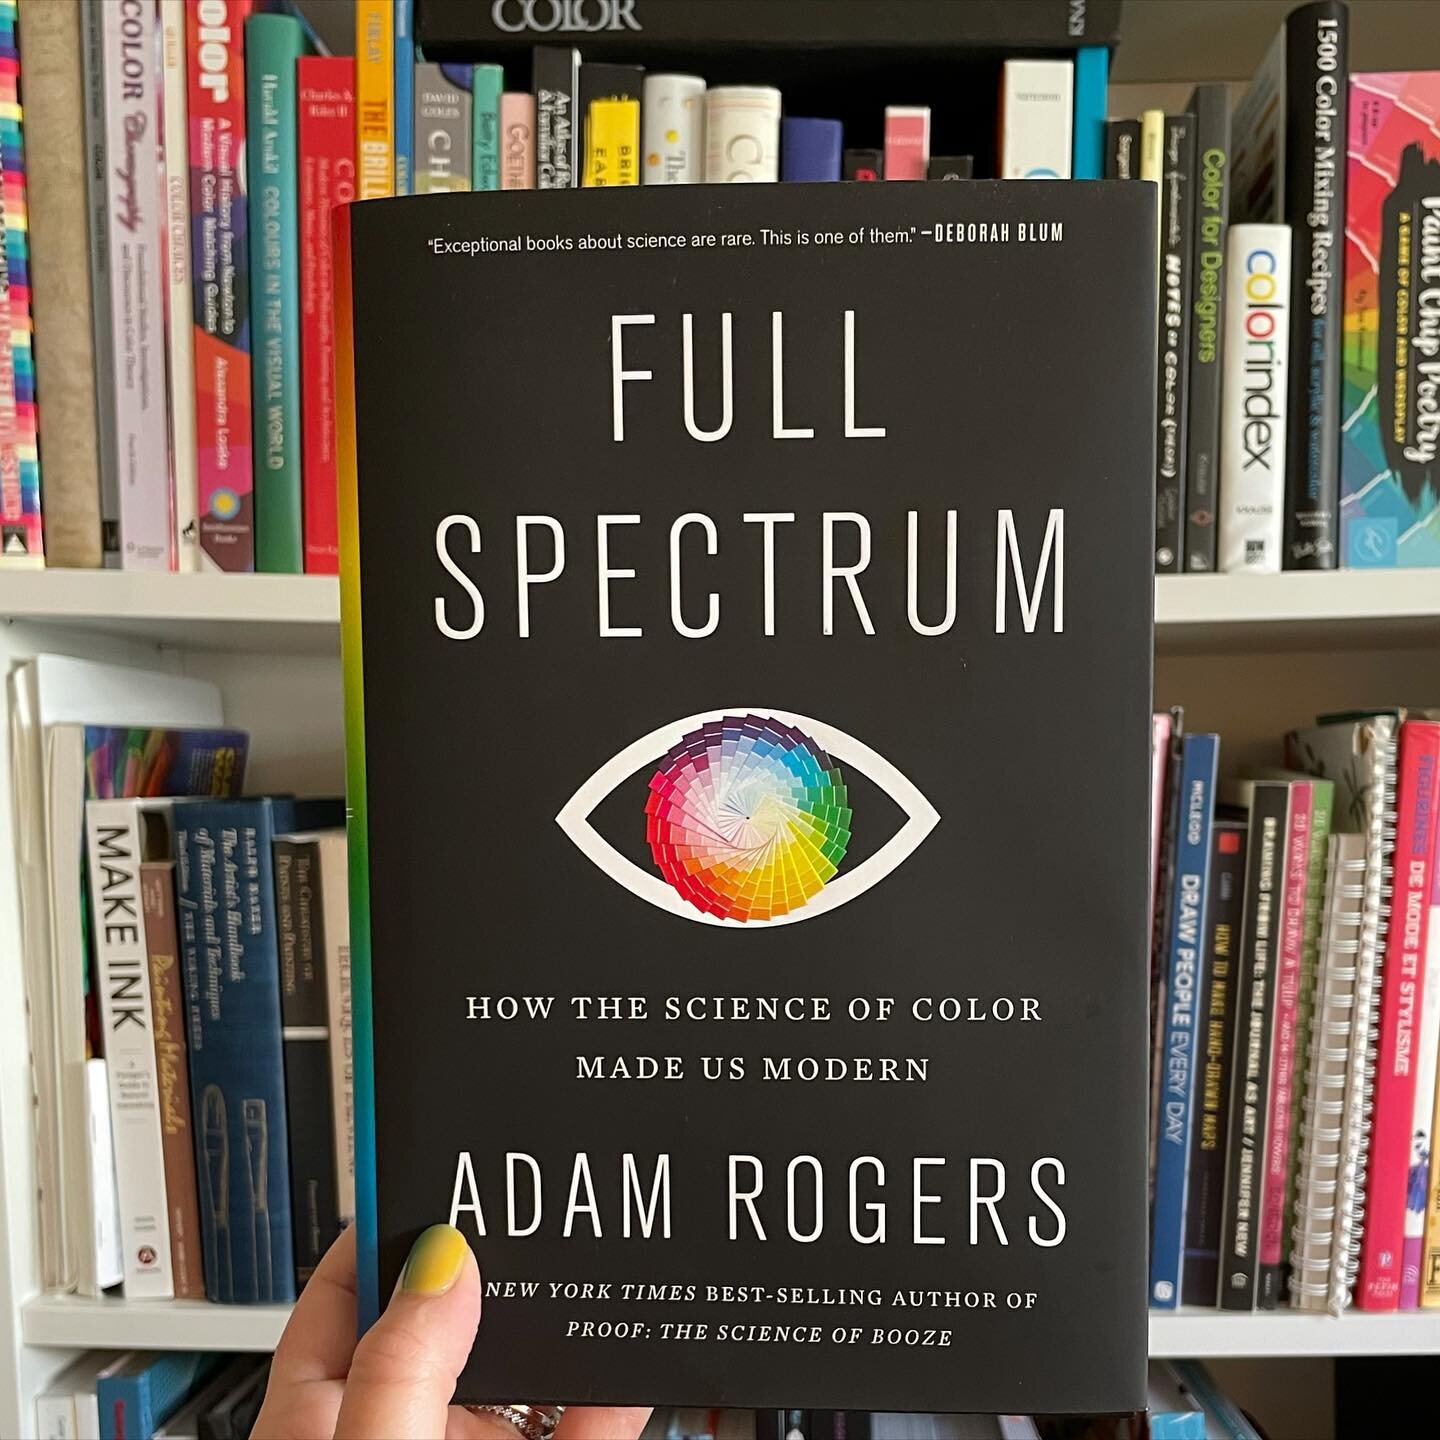 I&rsquo;ve been looking forward to this book and will happily add it to my color shelf when I&rsquo;m done reading it. I met Adam a couple years ago in a watercolor class I tought. He visited my studio later to talk about pigments, paintmaking, and c